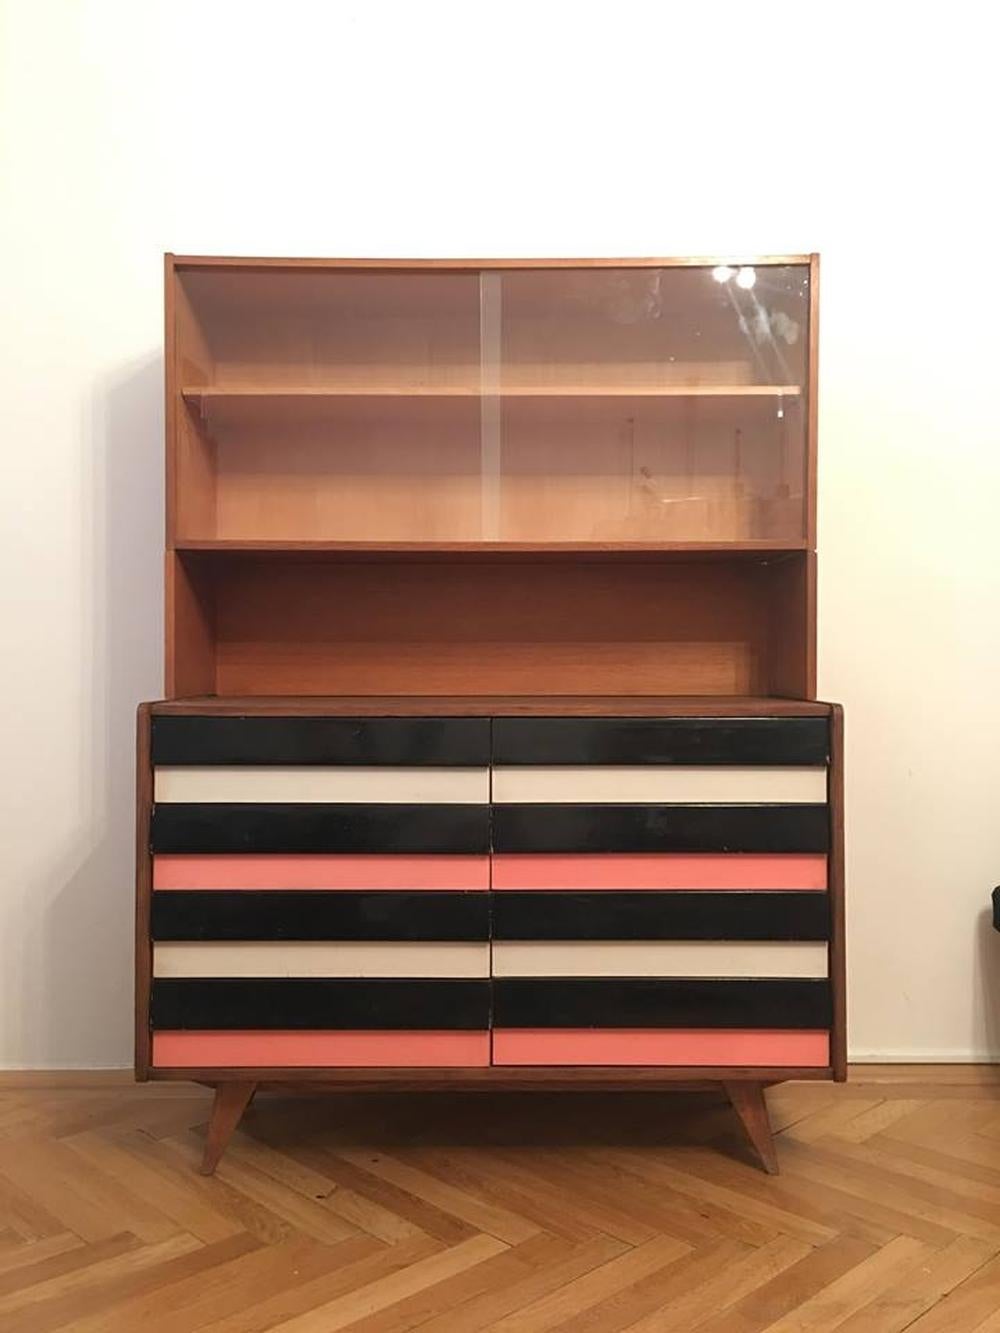 Original vintage chest of drawers with the bookcase. Drawers are in black and pink and grey-blue combination. Type U-453, manufactured in the 1960s by Interier Praha, designed by Jiri Jiroutek. Wooden construction, drawers are made of plastic, the